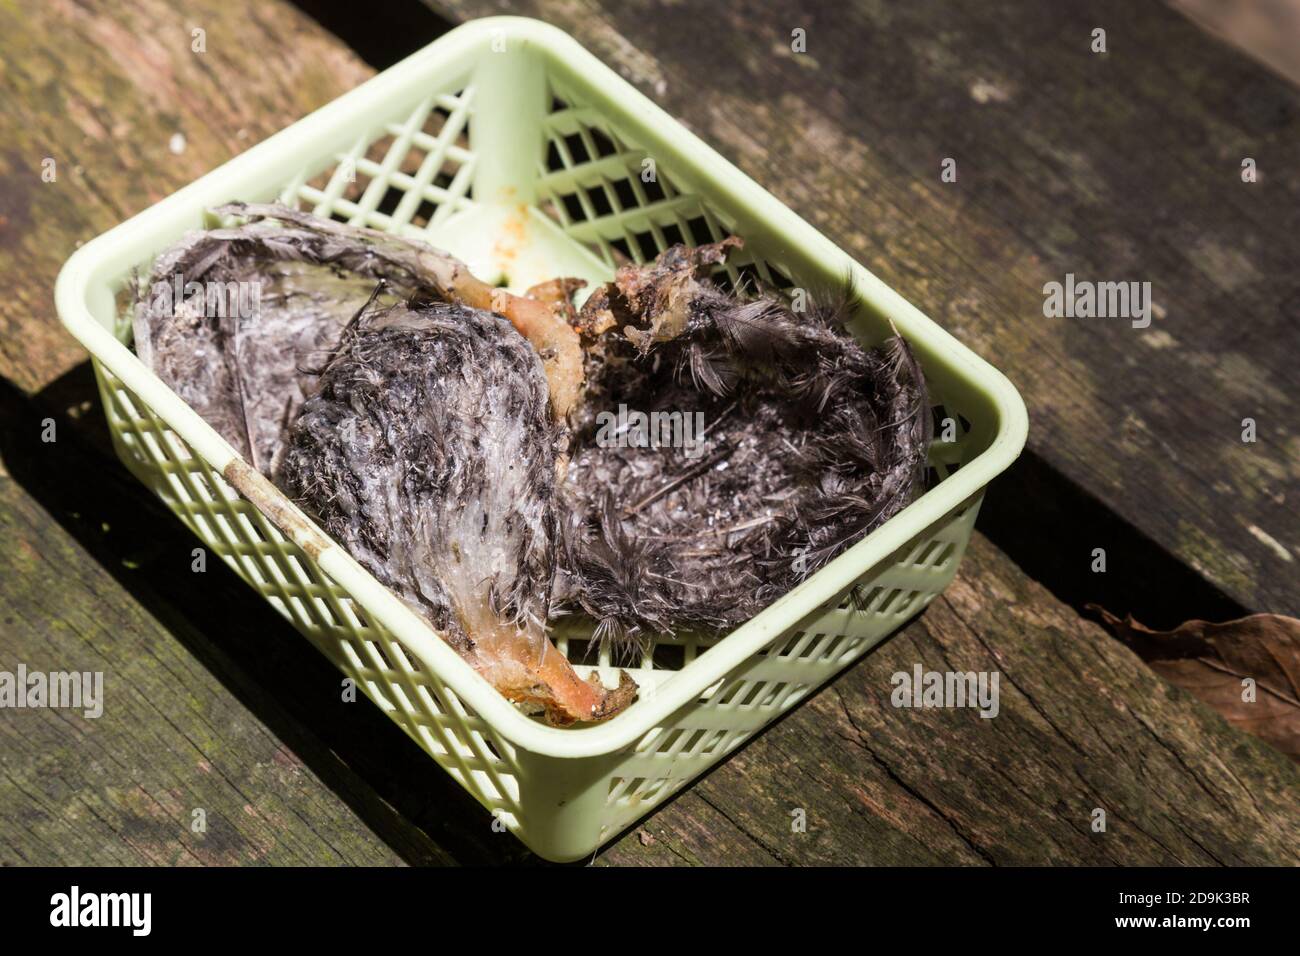 Freshly harvested unprocessed swiflet bird nest, ingredient for nutritious soup. Stock Photo